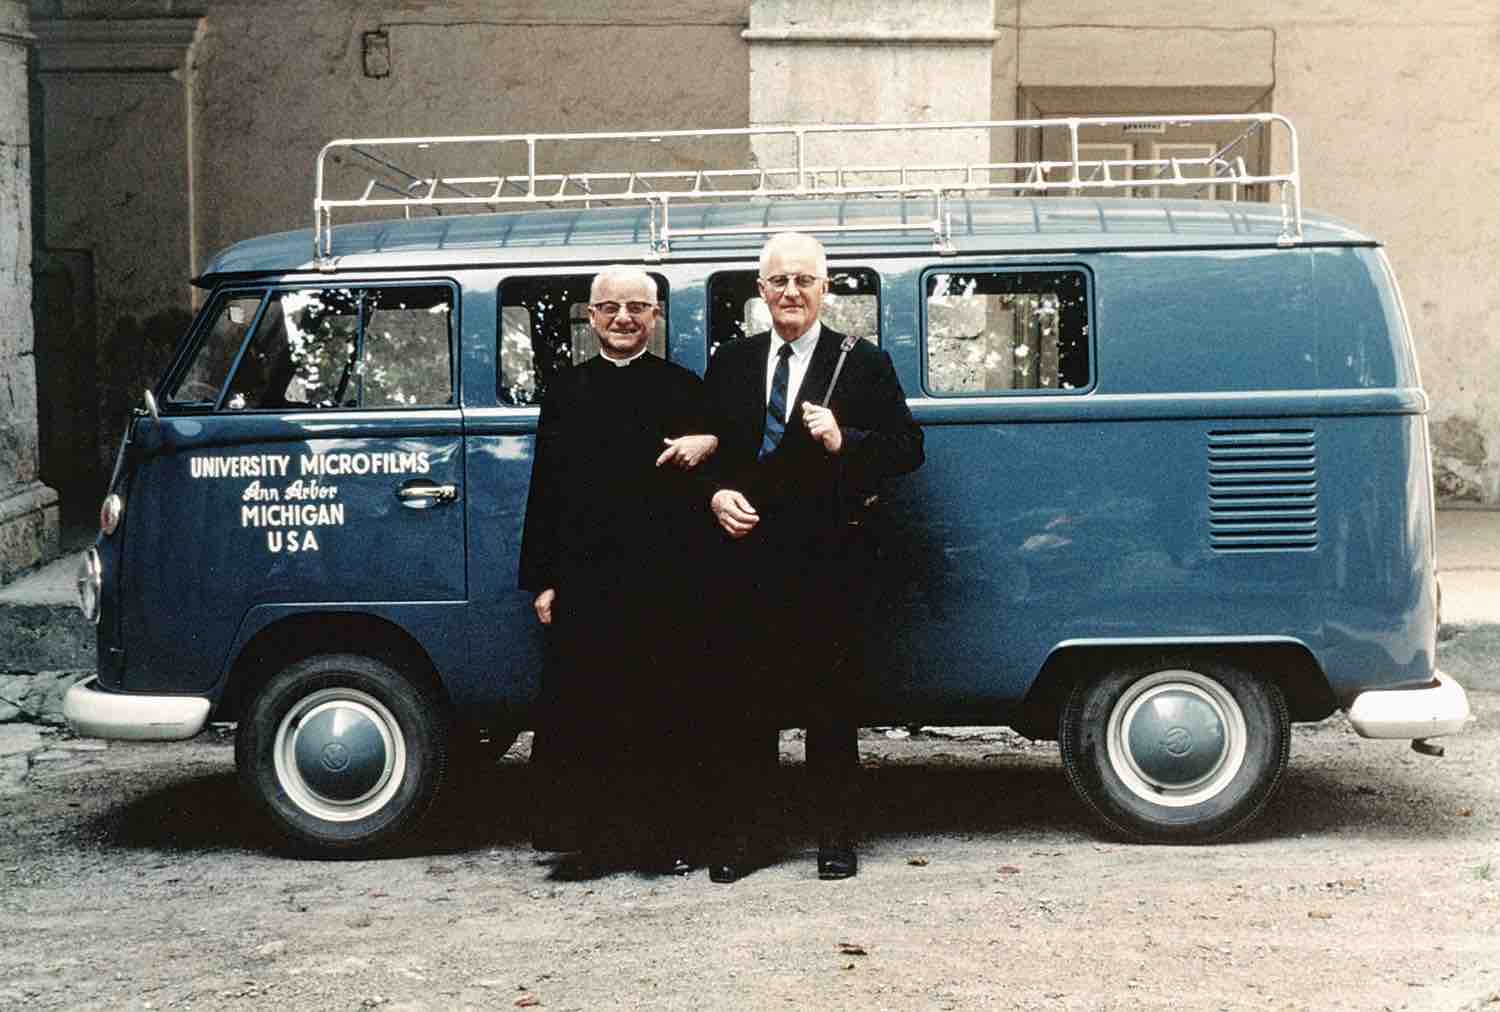 Fr. Oliver Kapsner, OSB, and University Microfilms’ Eugene B. Power with the minibus used to transport microfilm equipment and crew through Austria in the 1960s